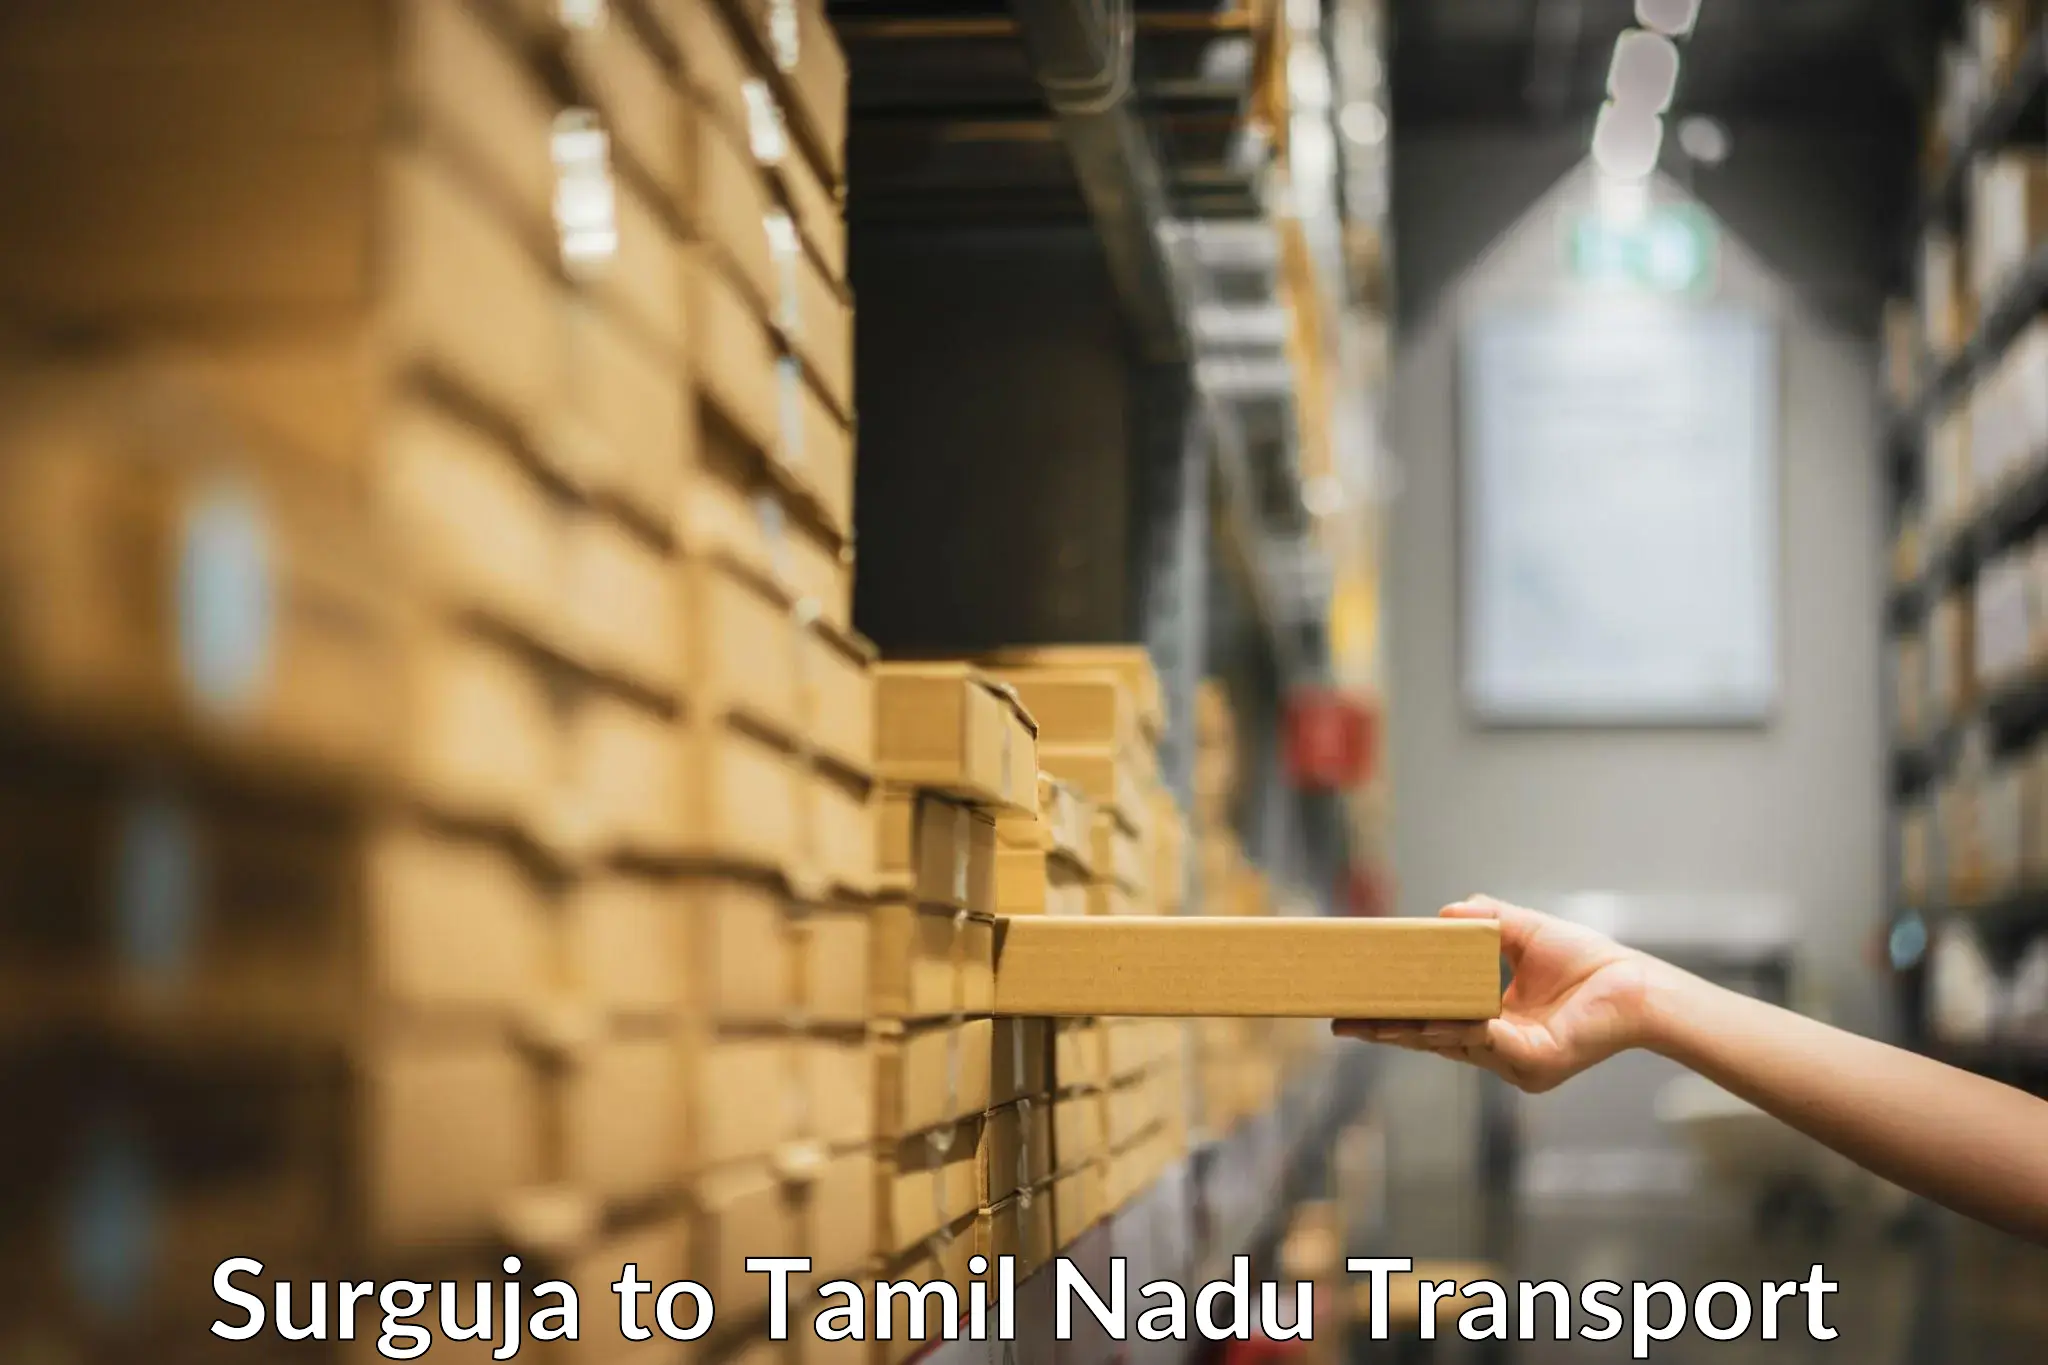 Goods delivery service Surguja to Katpadi